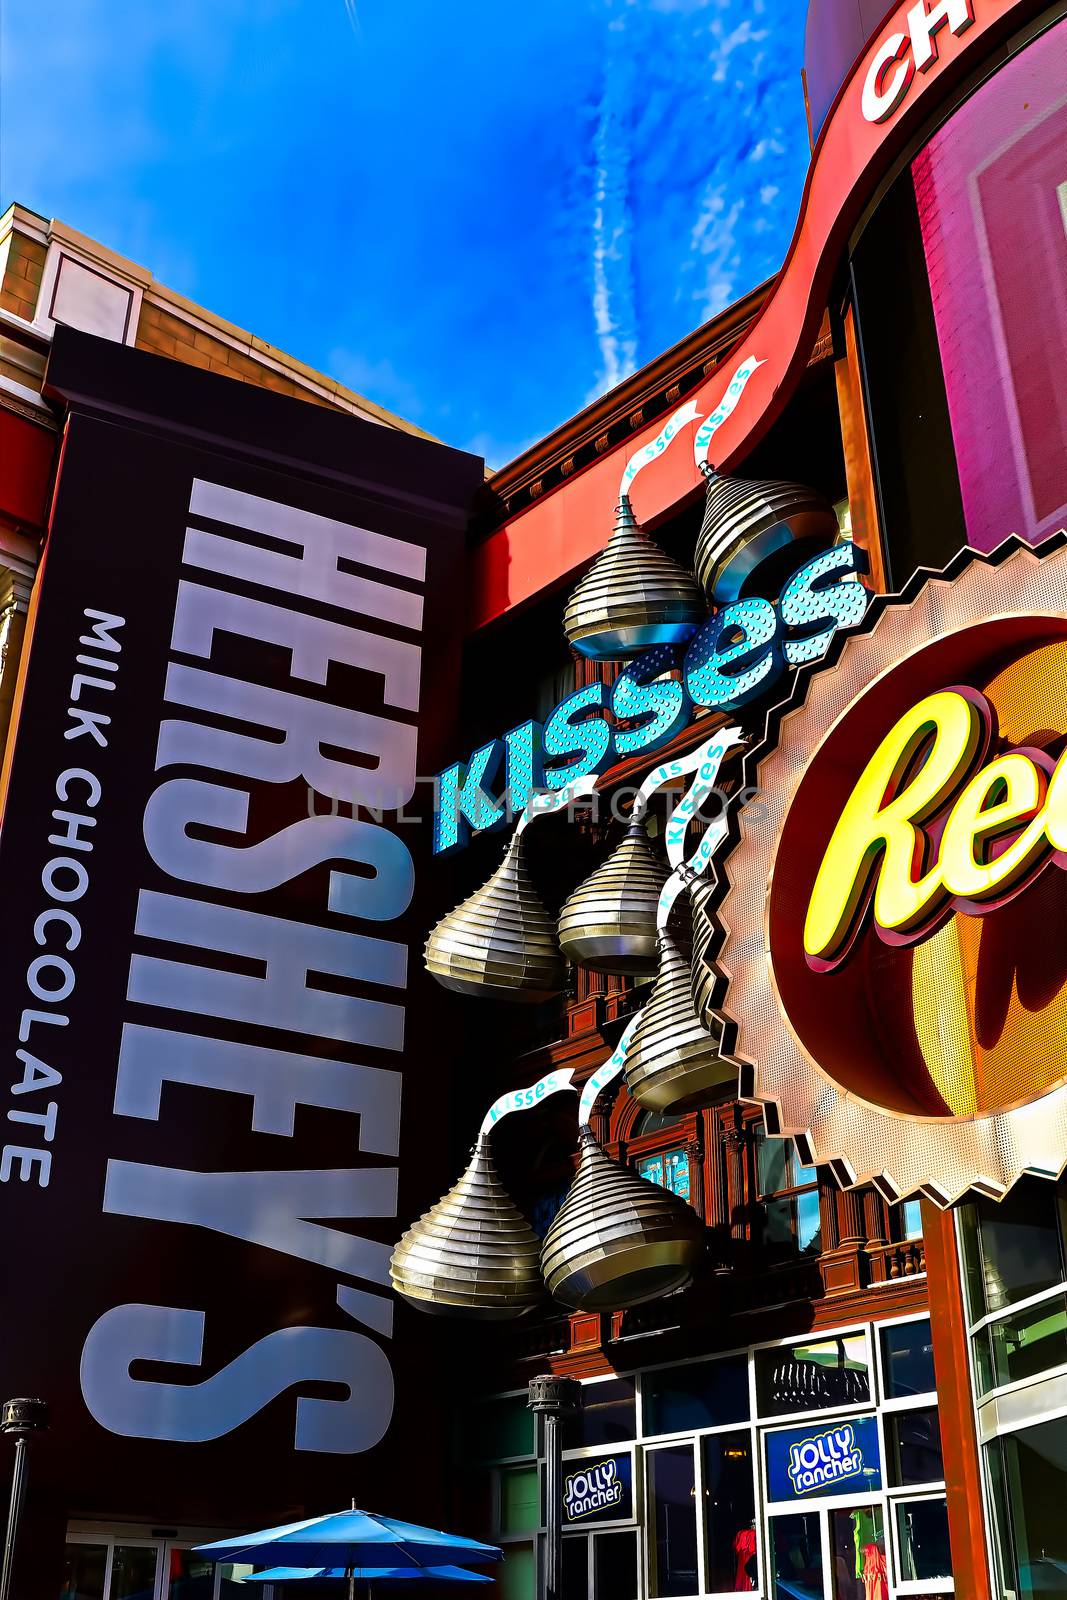 Las Vegas, NV/USA - Oct 09, 2016 : Exterior of the Hershey's Chocolate World in Las Vegas. The 13,000 sq ft store has over 800 different chocolates.